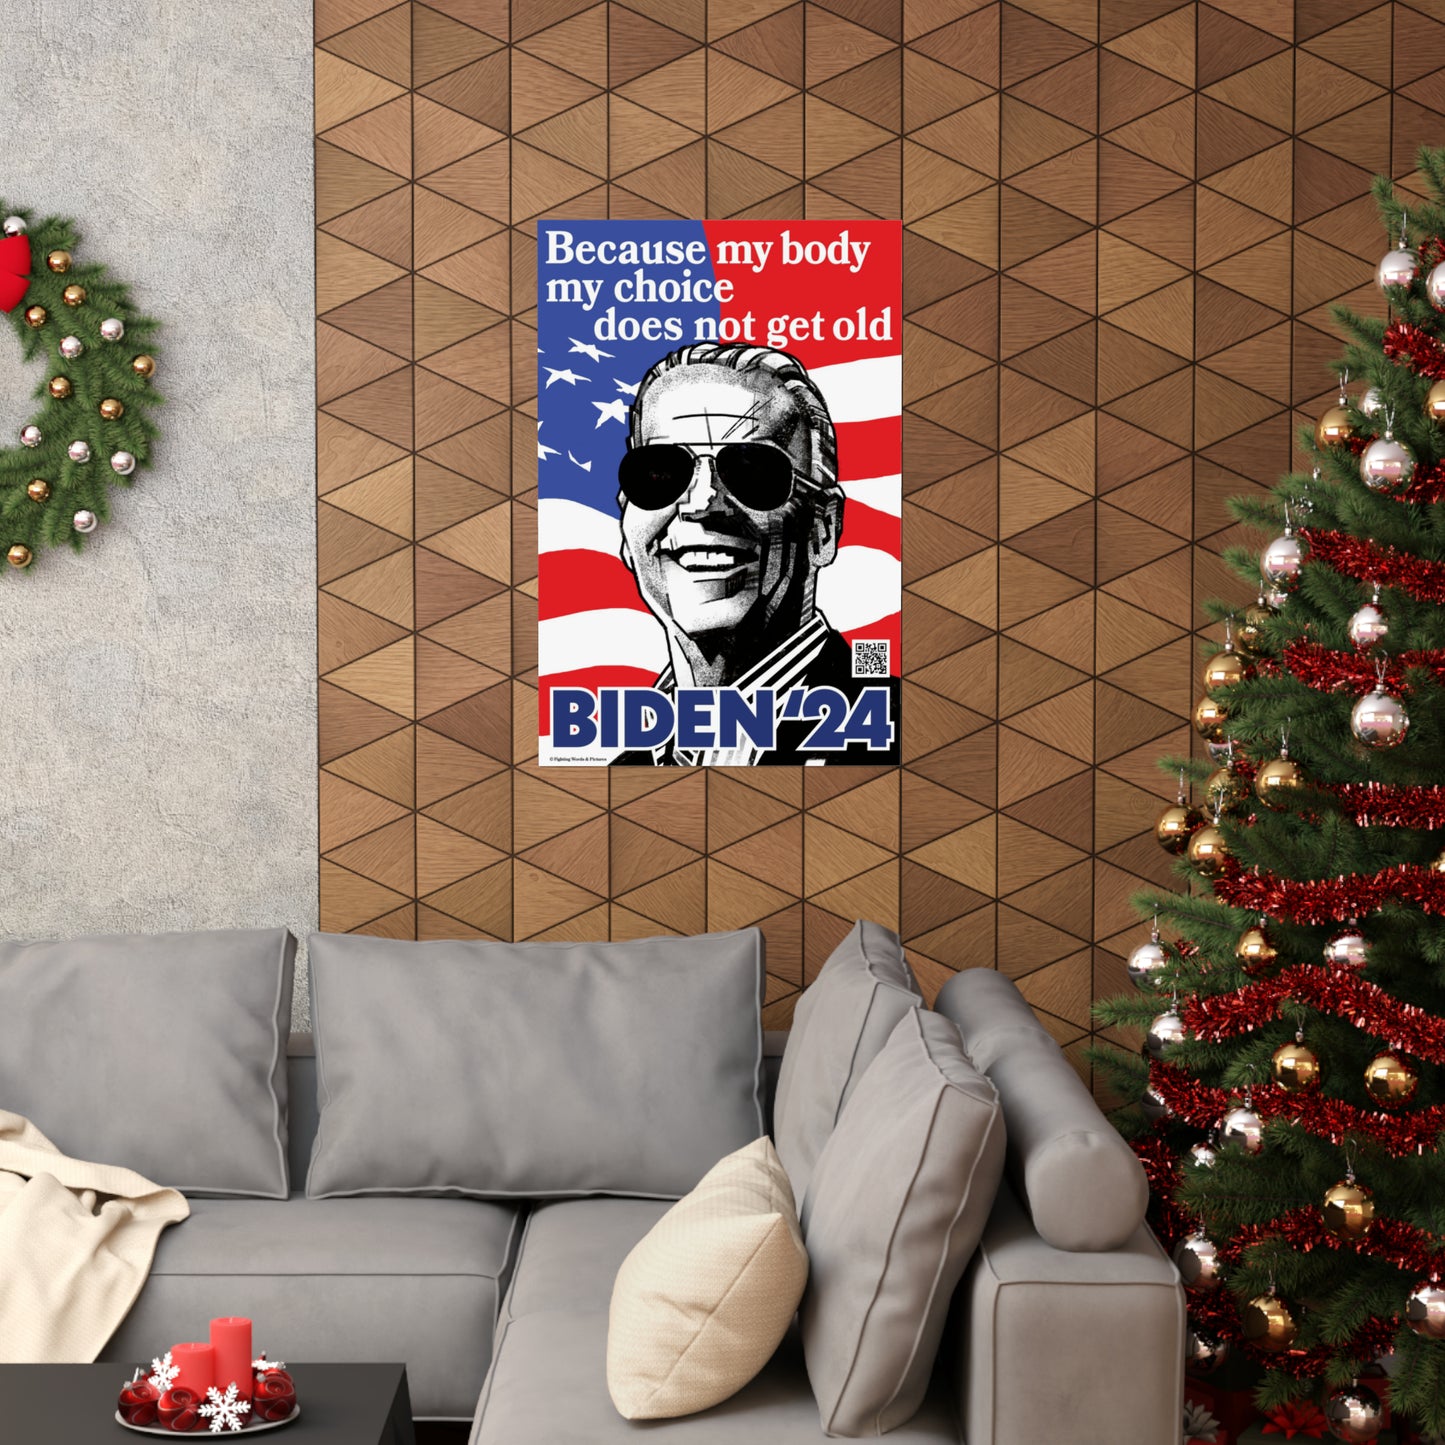 BIDEN'24 Because my body my choice does not get old Premium Matte Vertical Posters